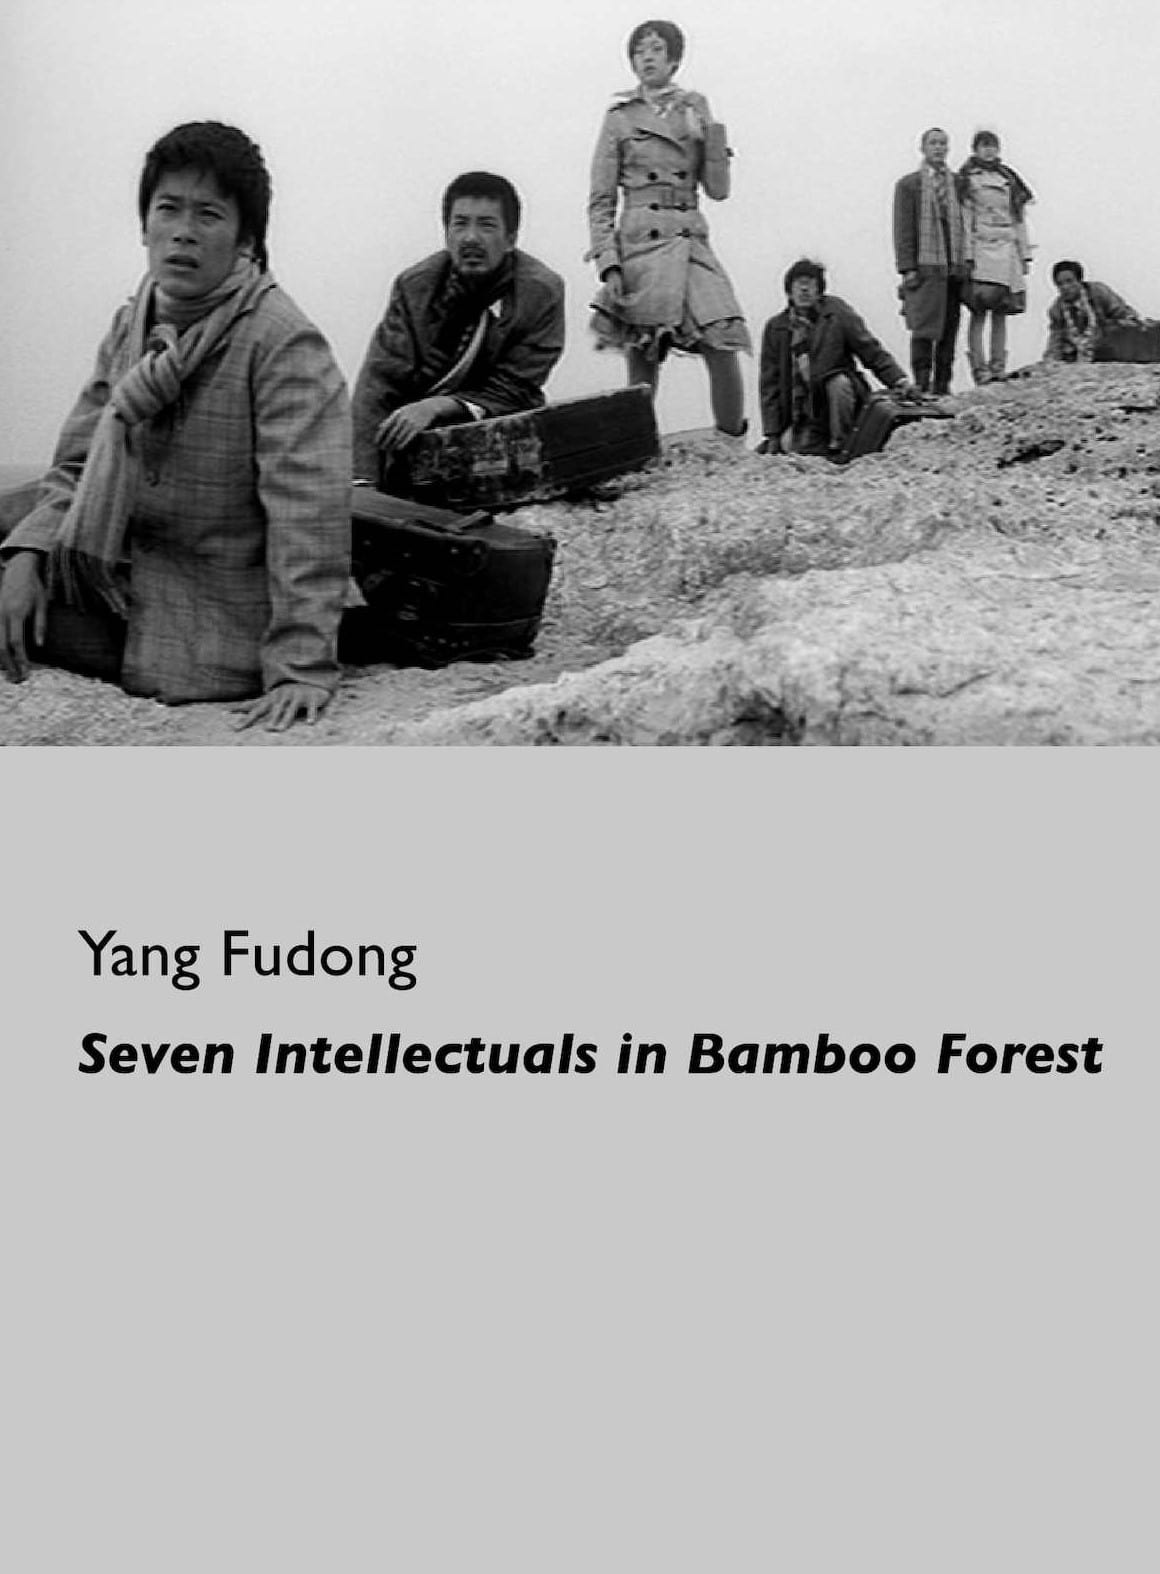 Seven Intellectuals in Bamboo Forest, Part III